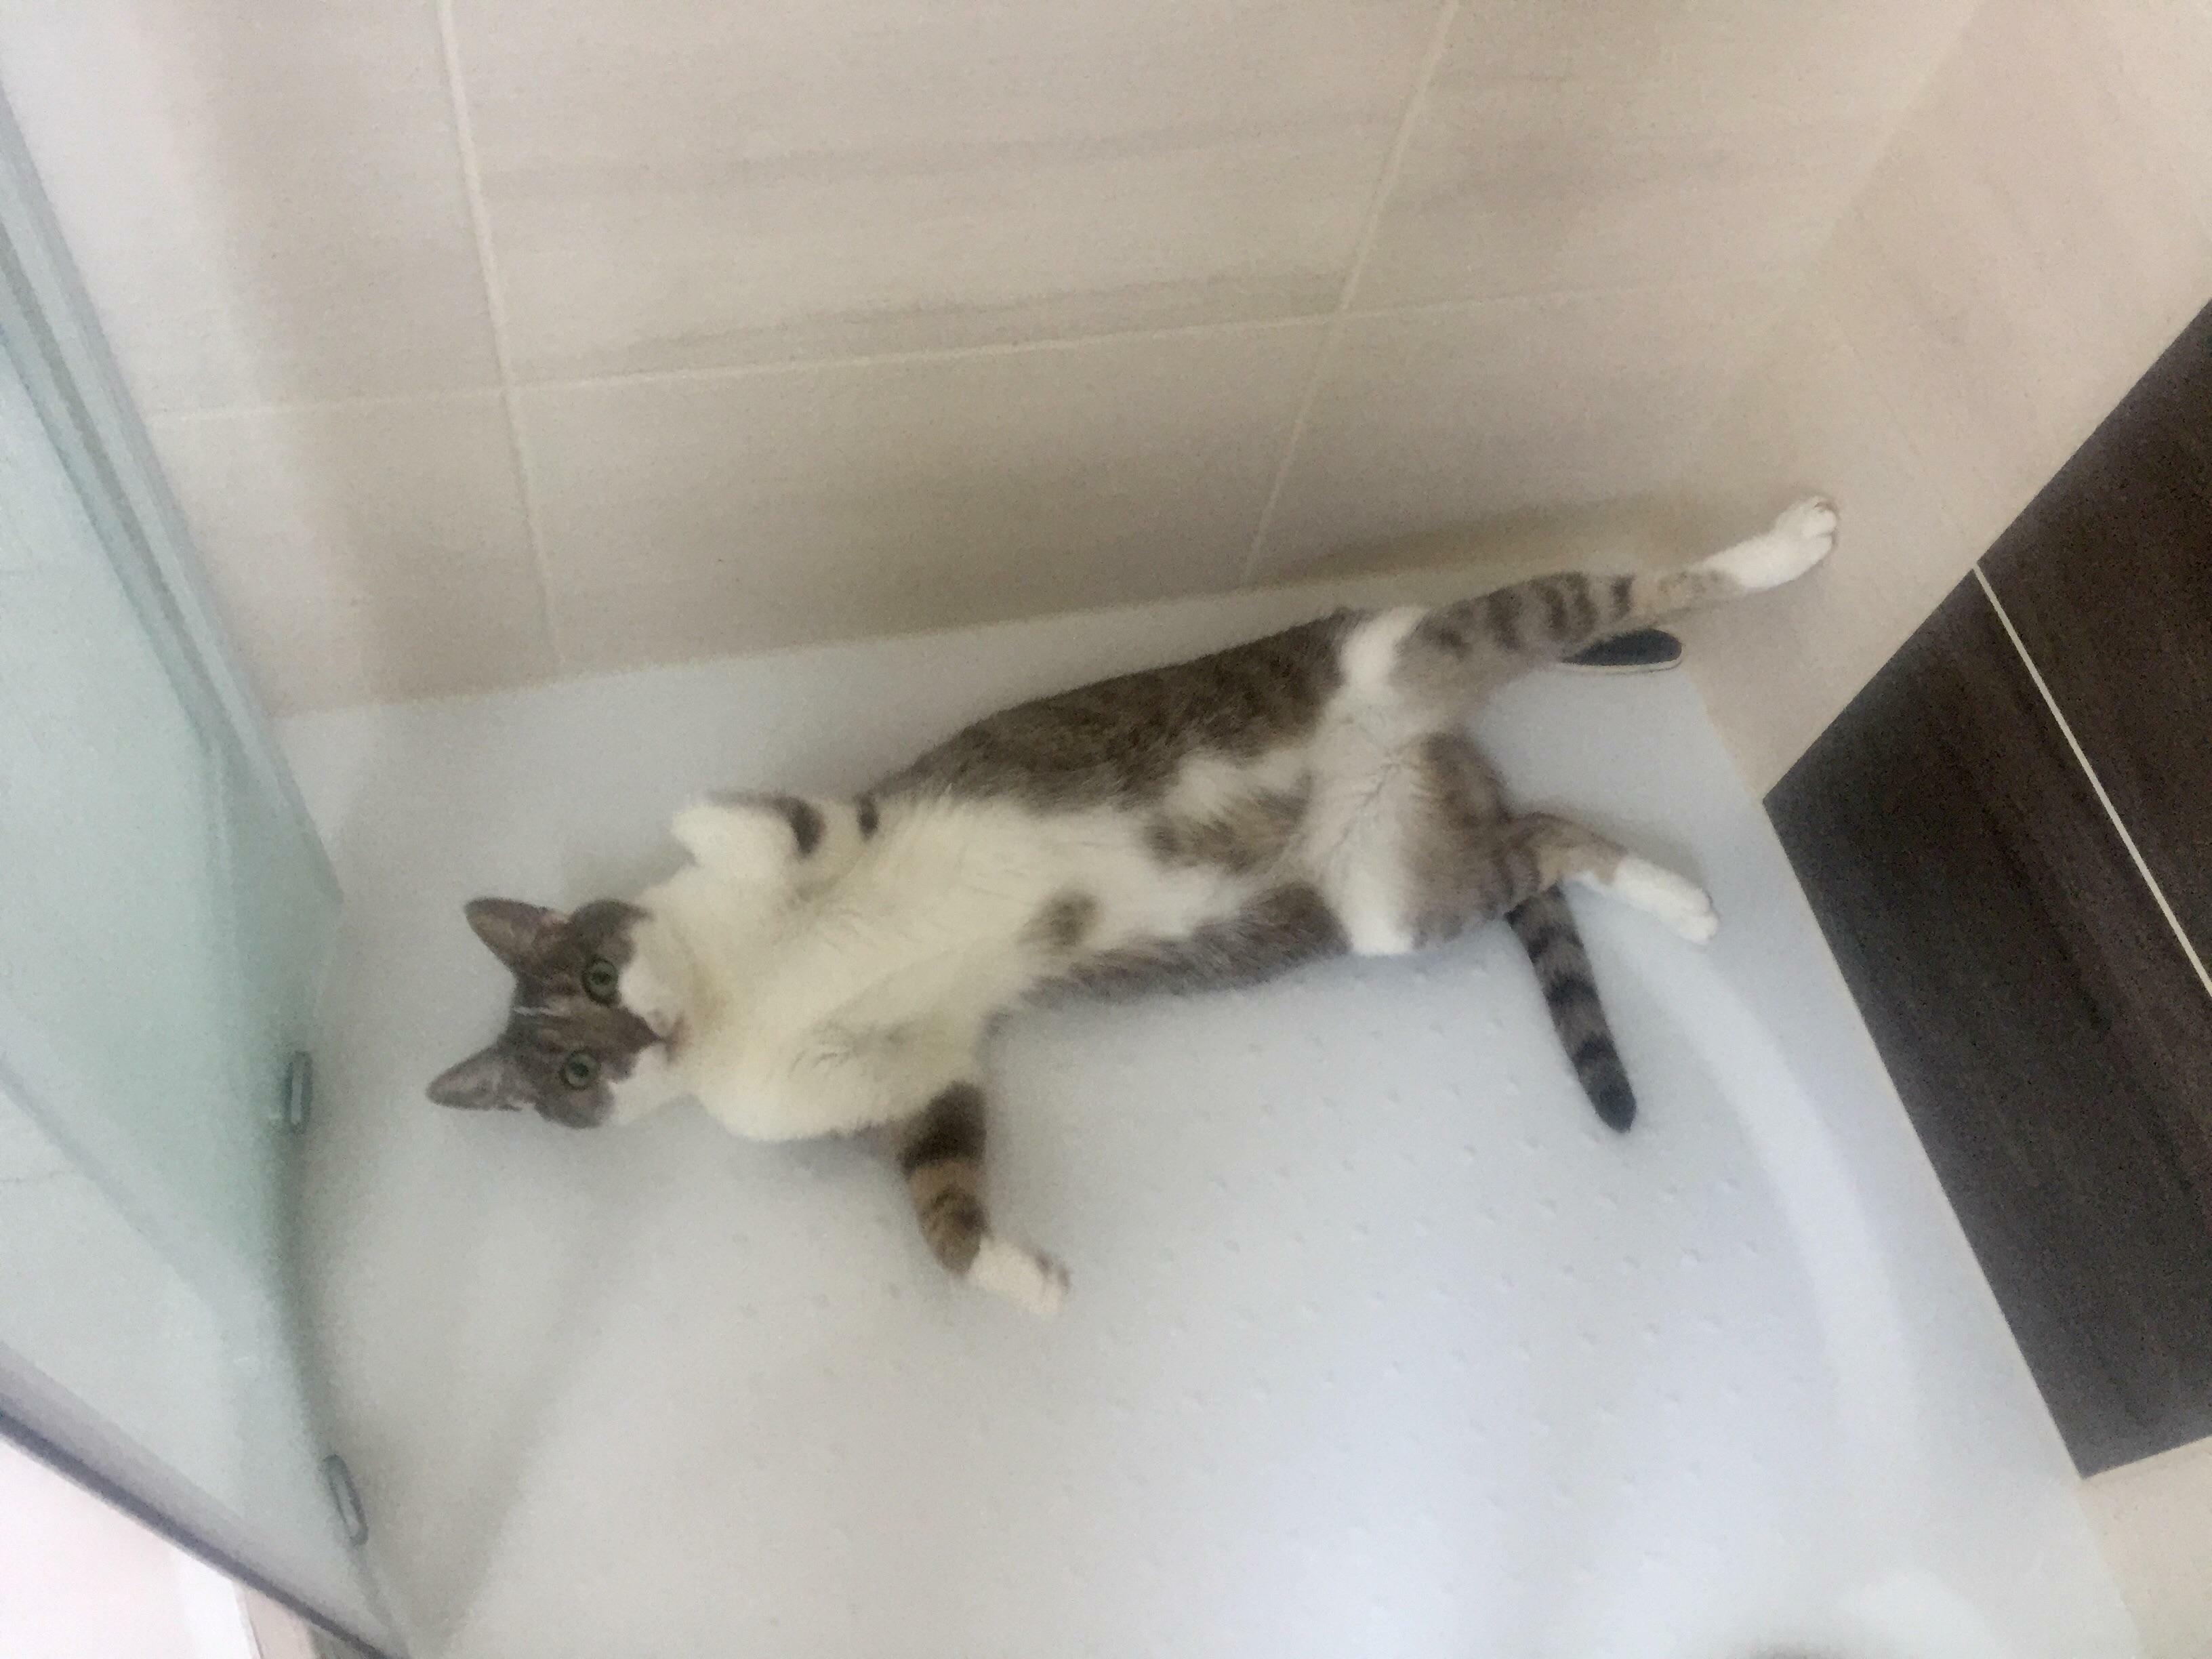 Walked In On Her In The Shower. Probably Should Have Knocked First